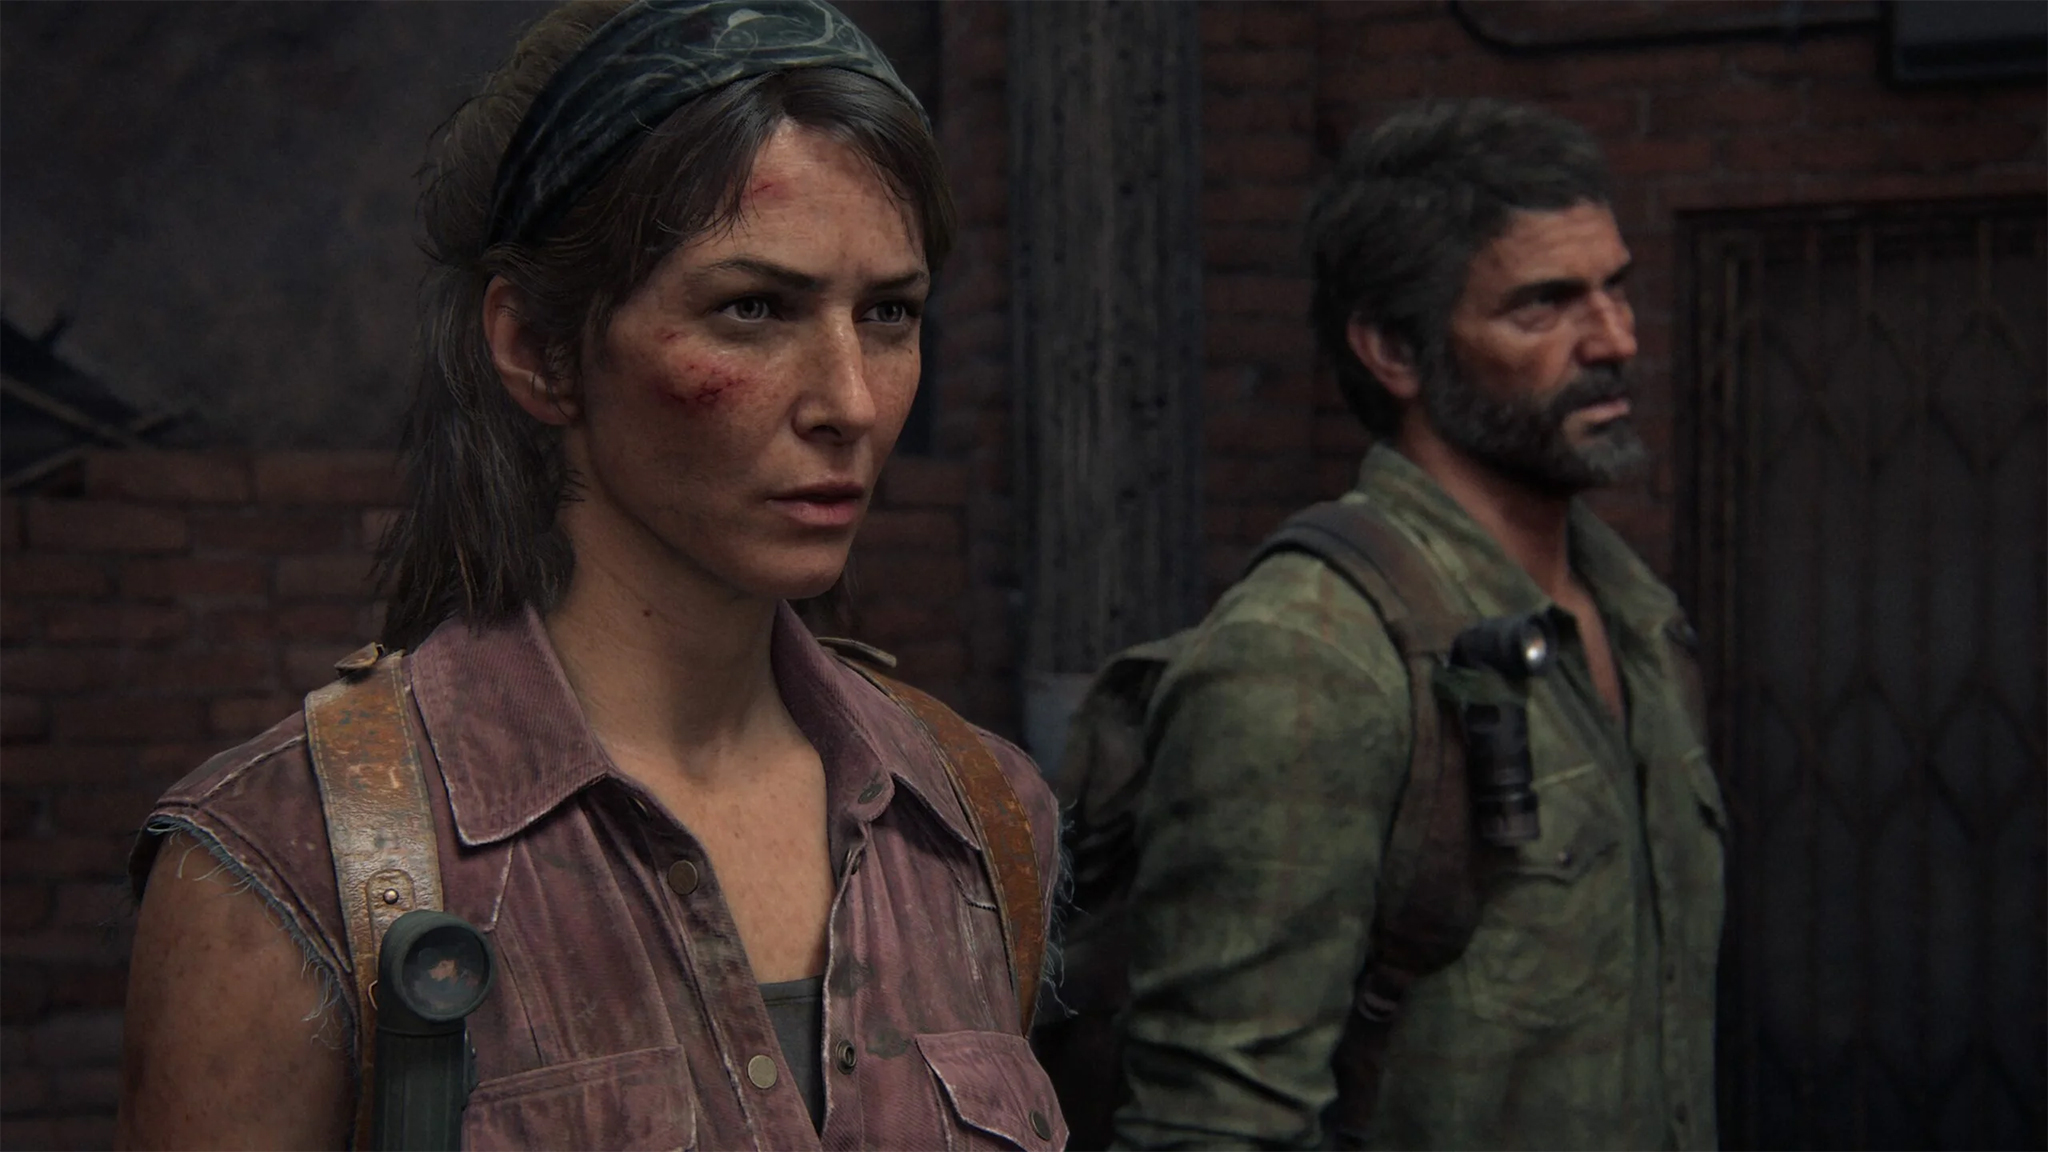 The Last of Us Episode 2 Review: 'Infected' Has Video Game Rules